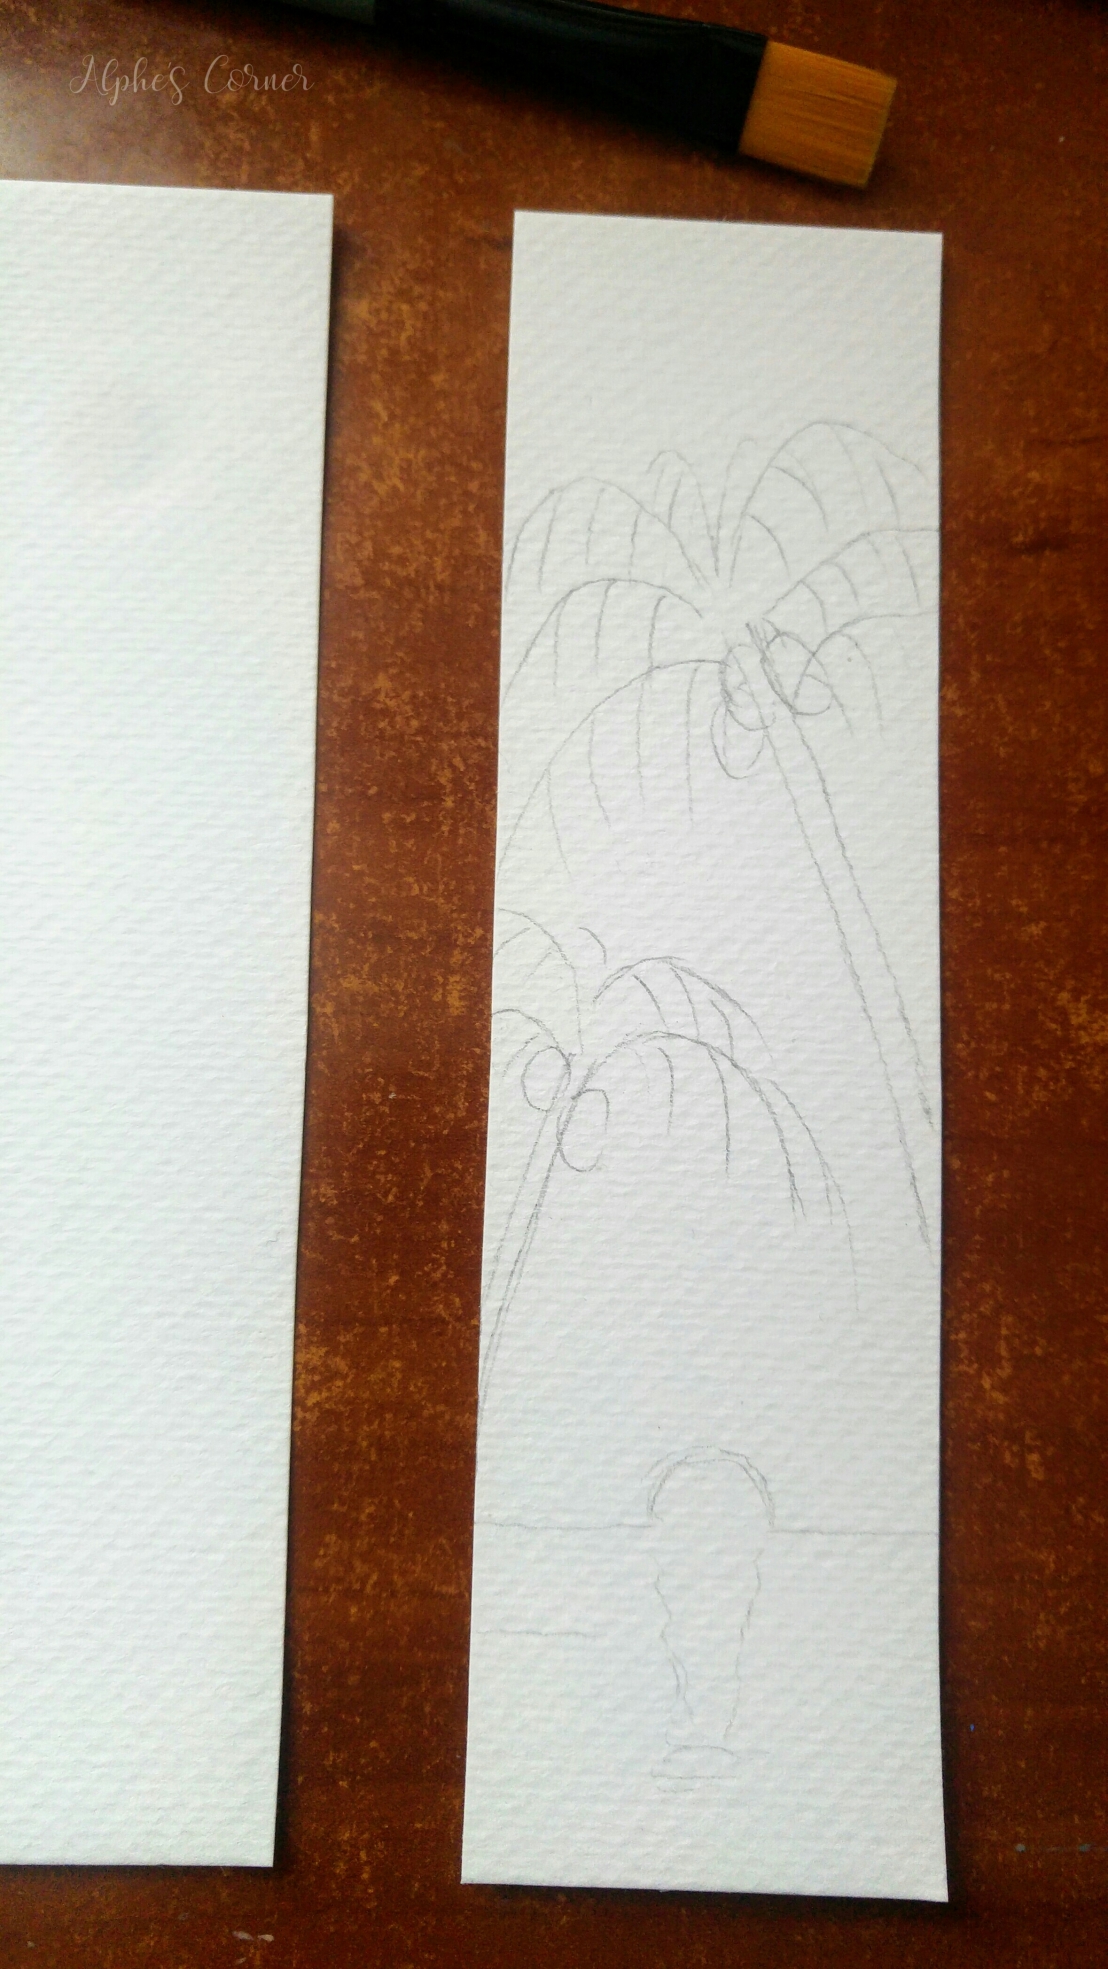 Sketching the sunset and palm trees on a bookmark